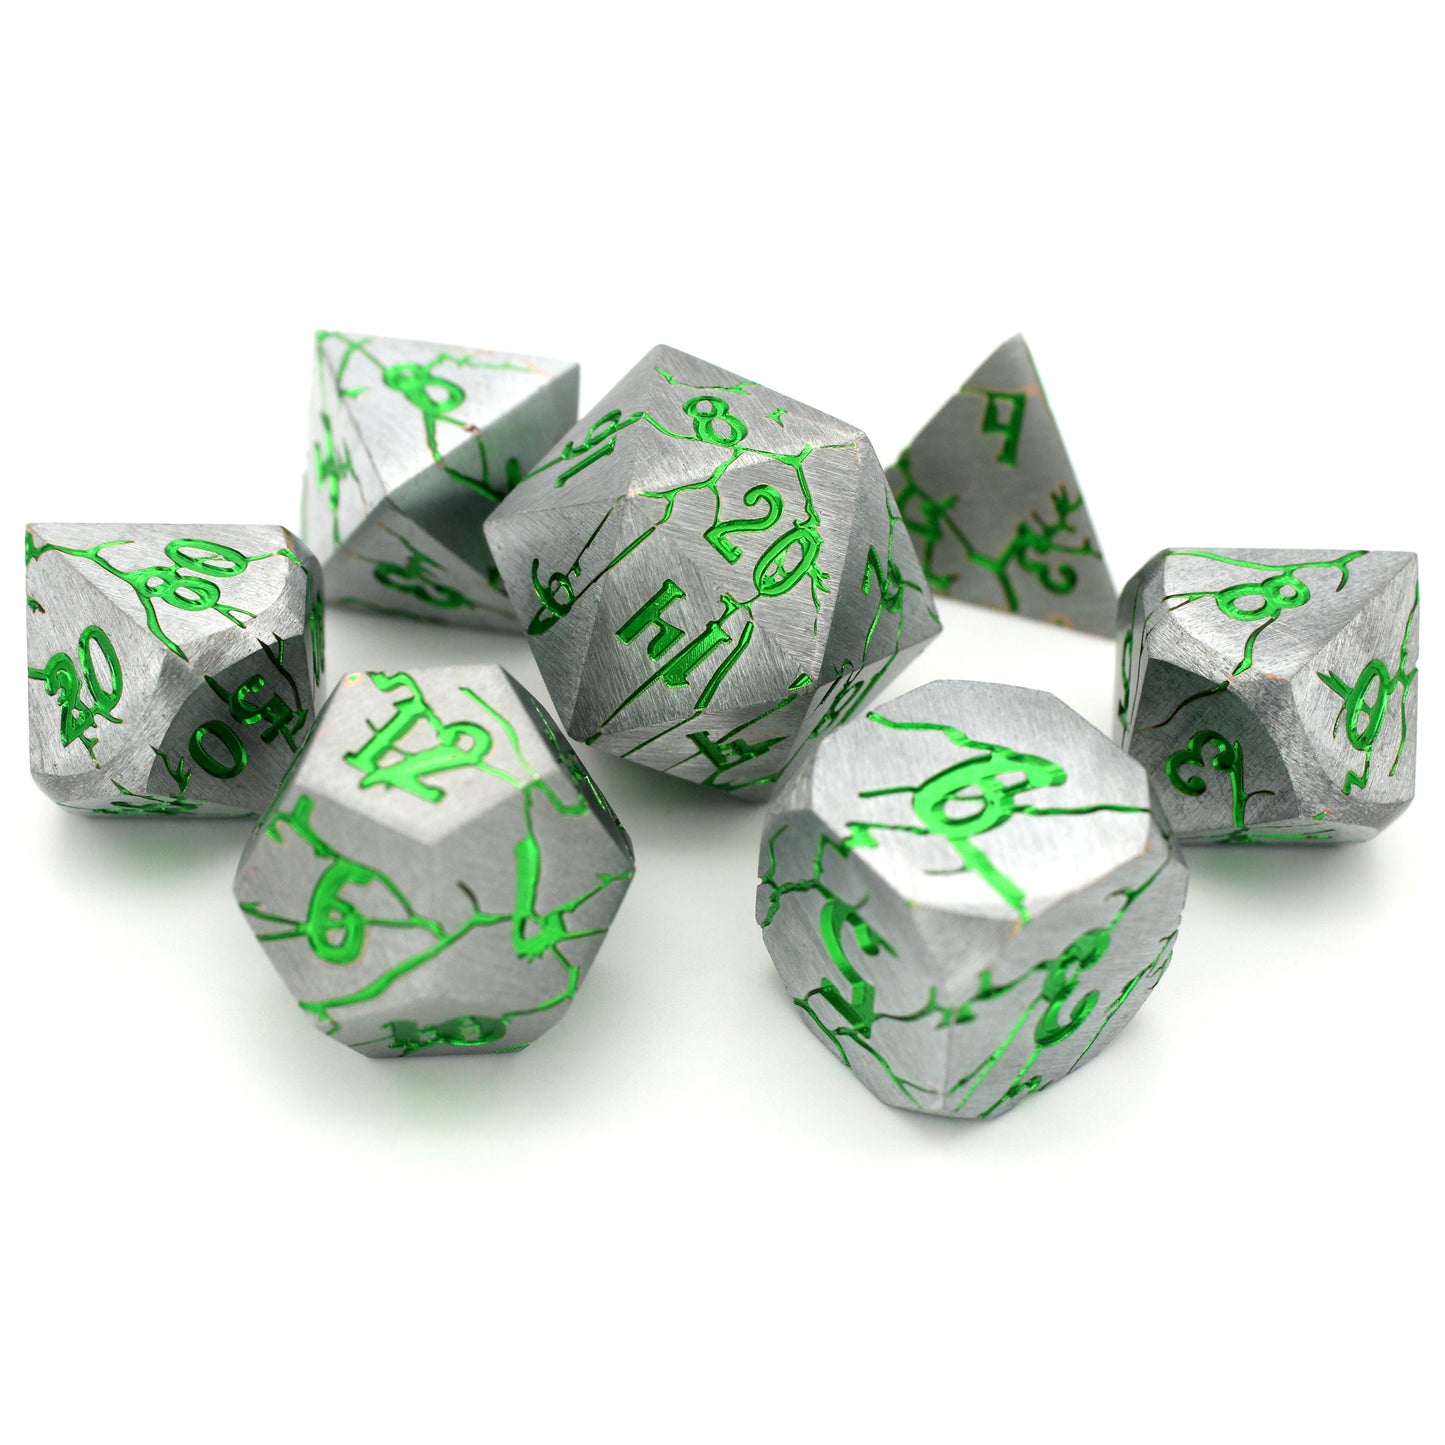 Minauros Mire is a 7-piece set of silver dice, streaked through with cracks and numbers of metallic green.